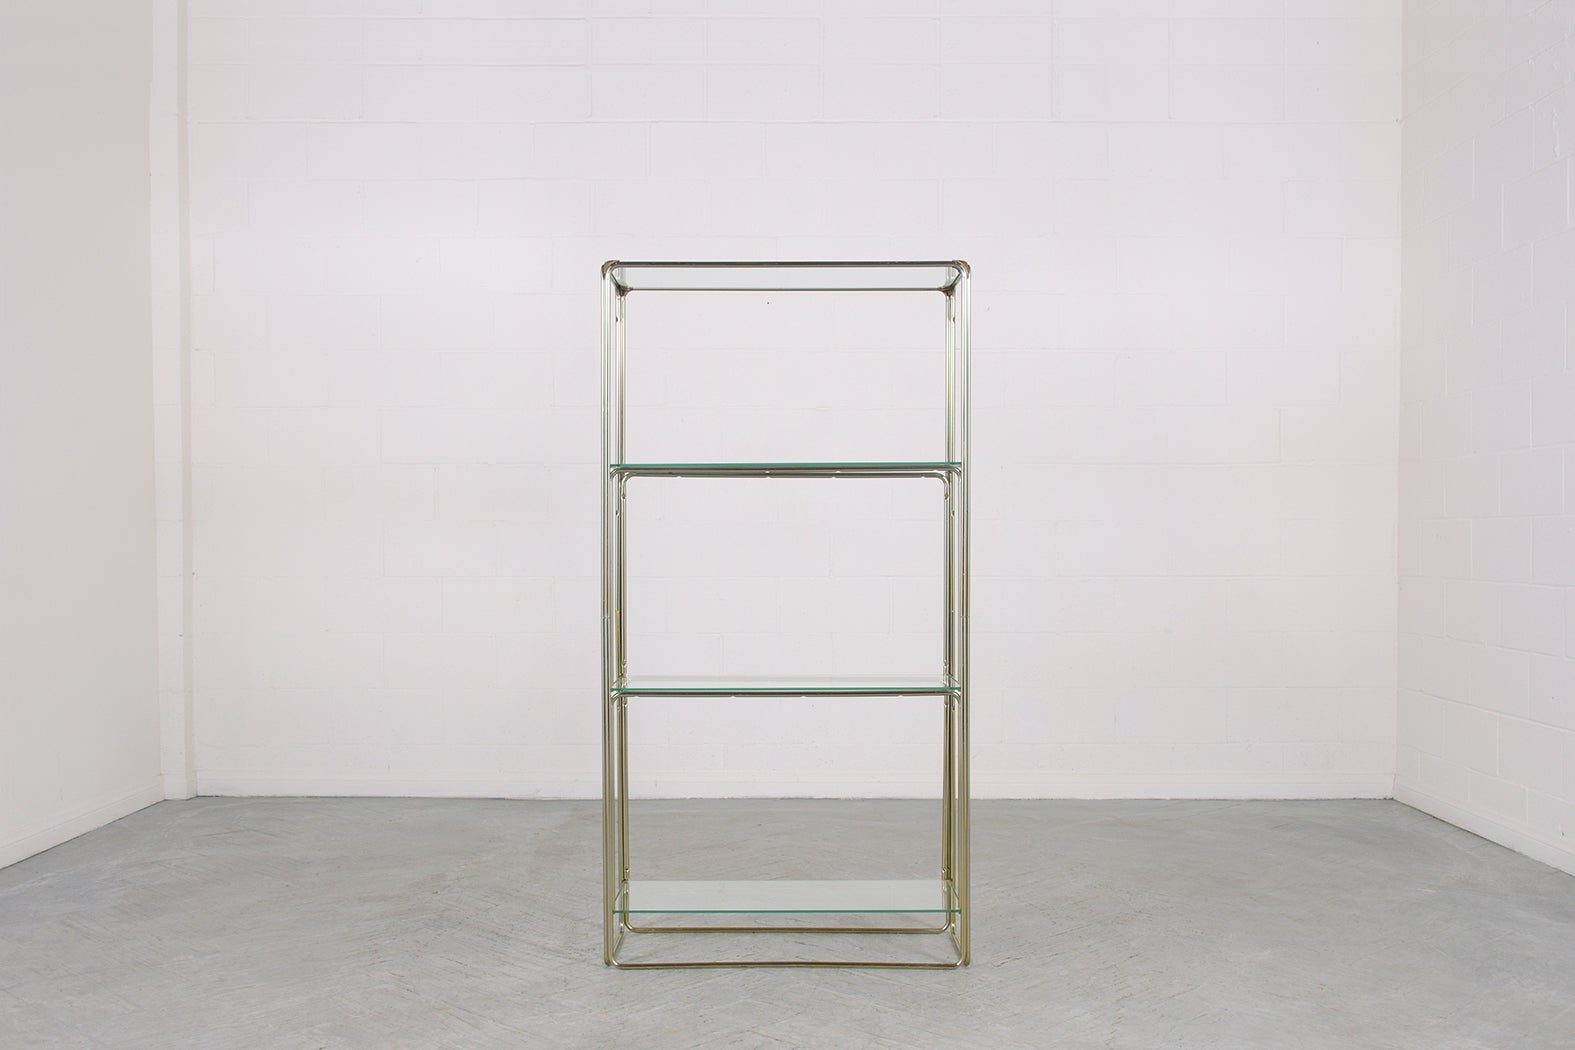 This extraordinary 1960s mid-century modern bookcase in good condition is beautifully hand-crafted out of clear glass and steel with a chrome finish. This vintage display clear glass open shelf features a sleek tubular chrome molding frame